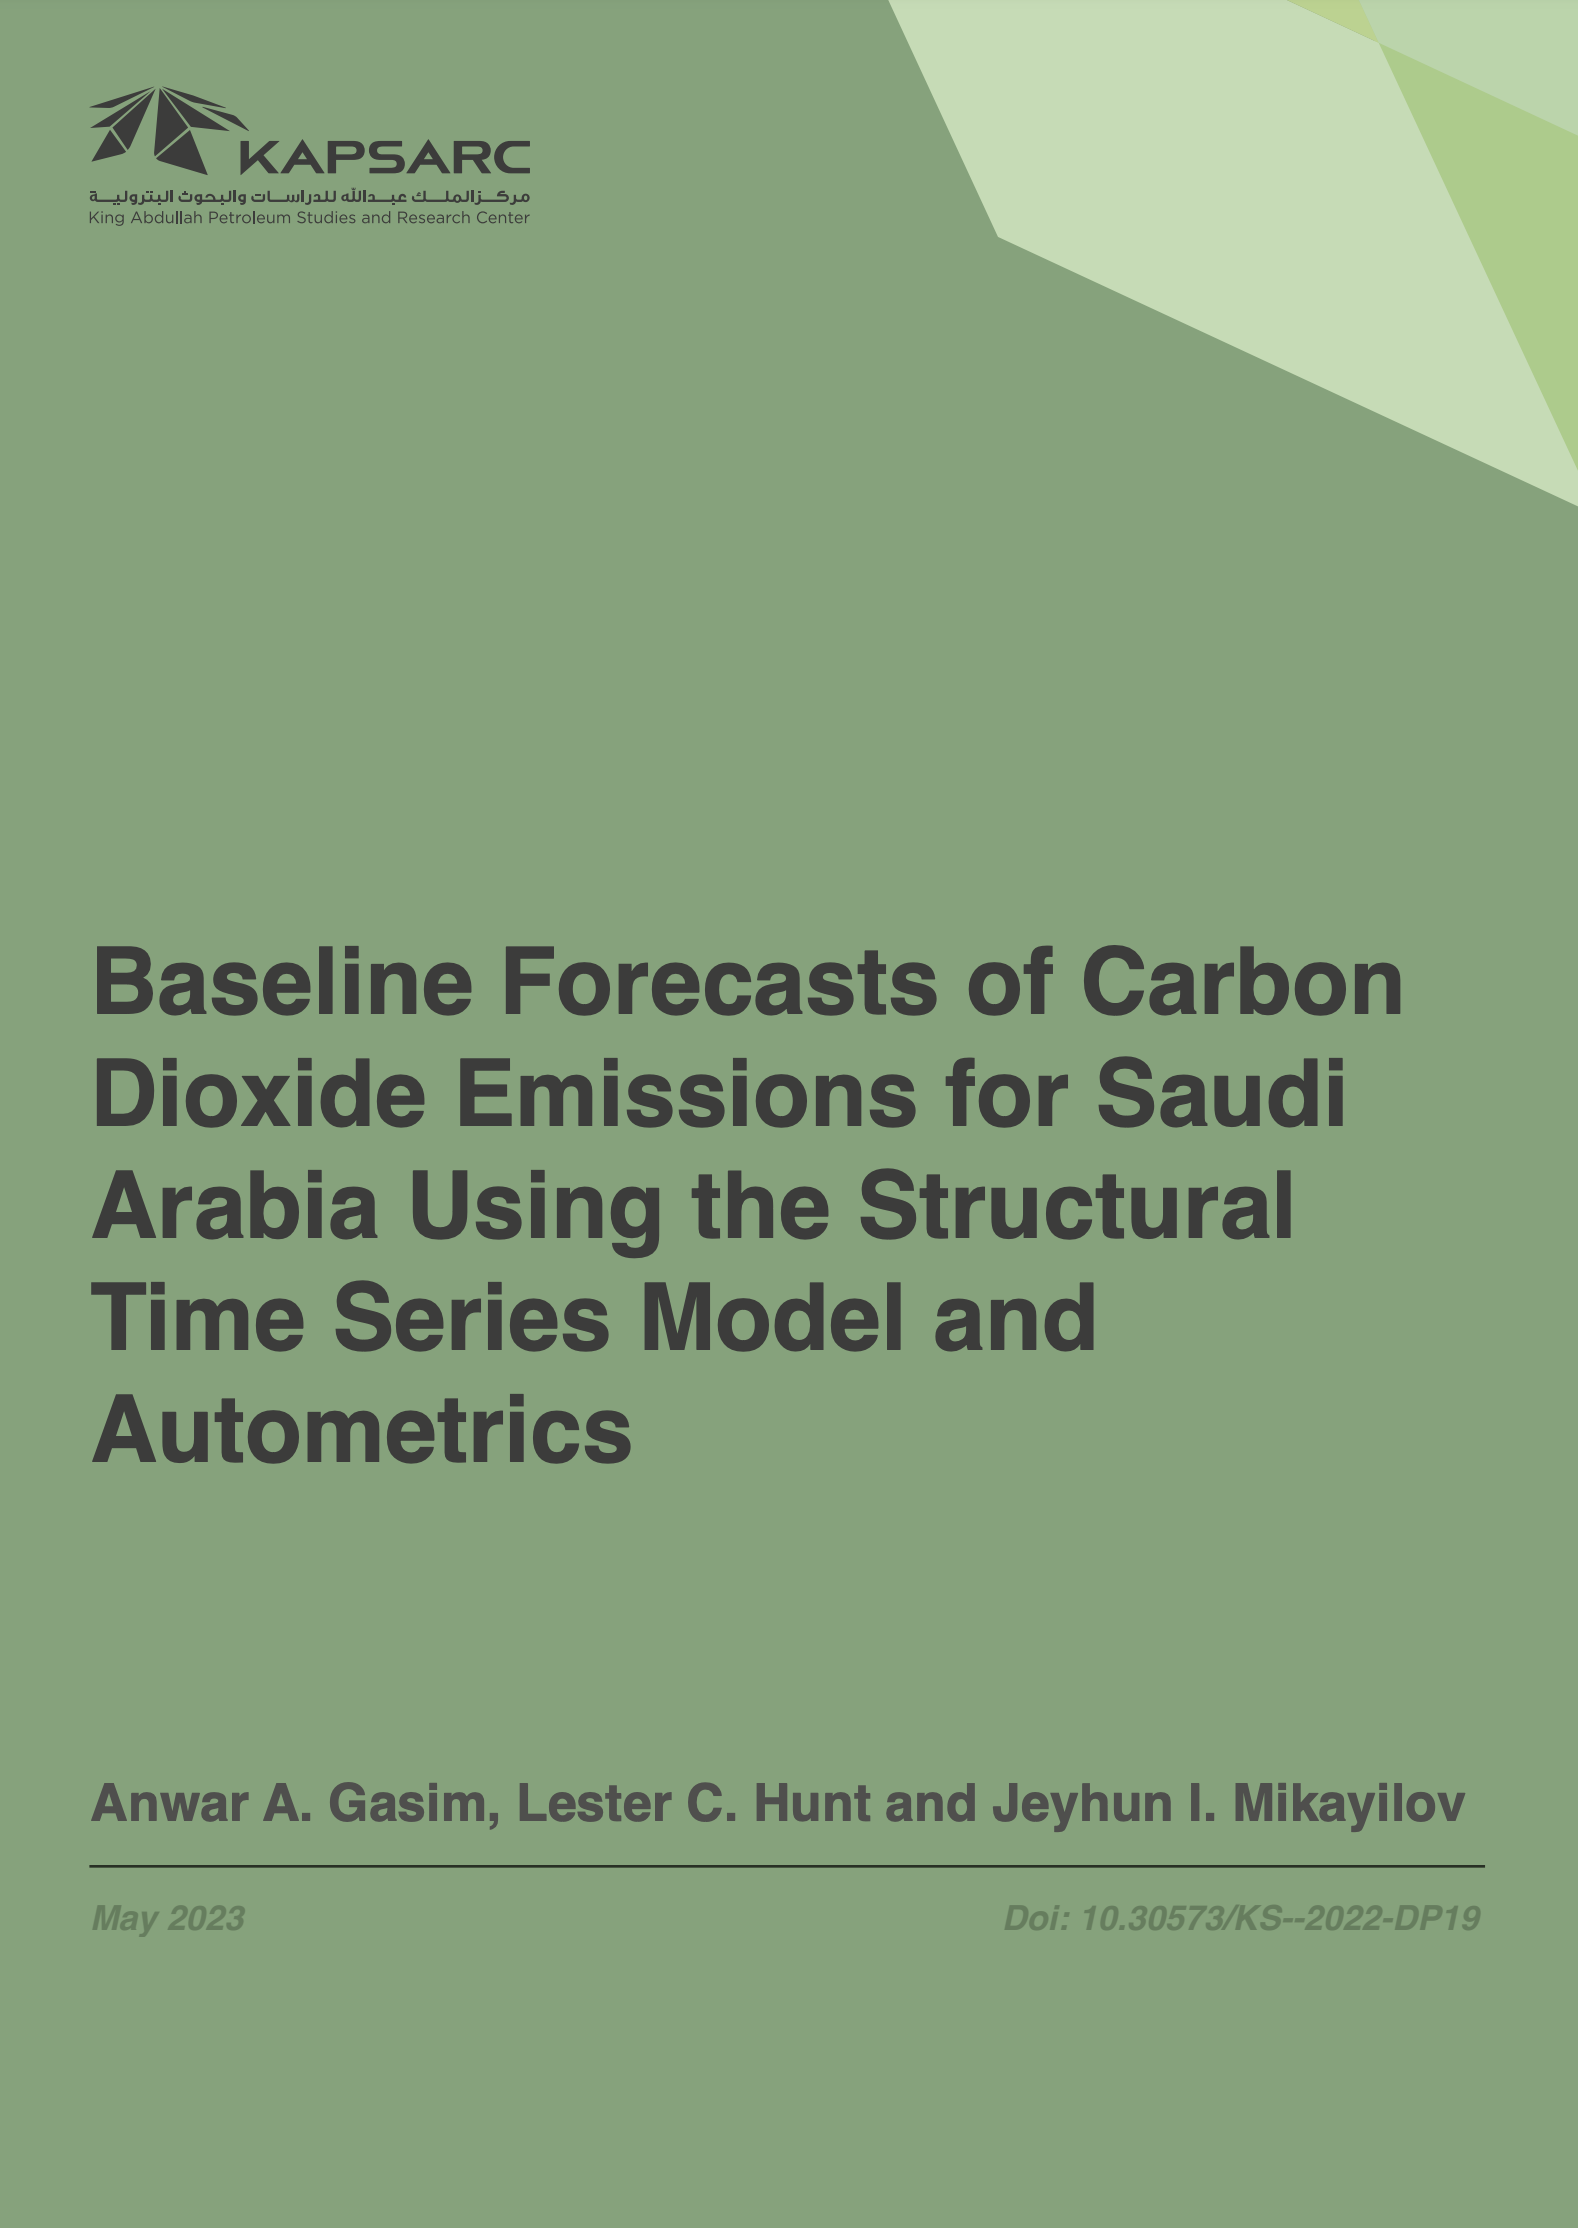 Baseline Forecasts of Carbon Dioxide Emissions for Saudi Arabia Using the Structural Time Series Model and Autometrics